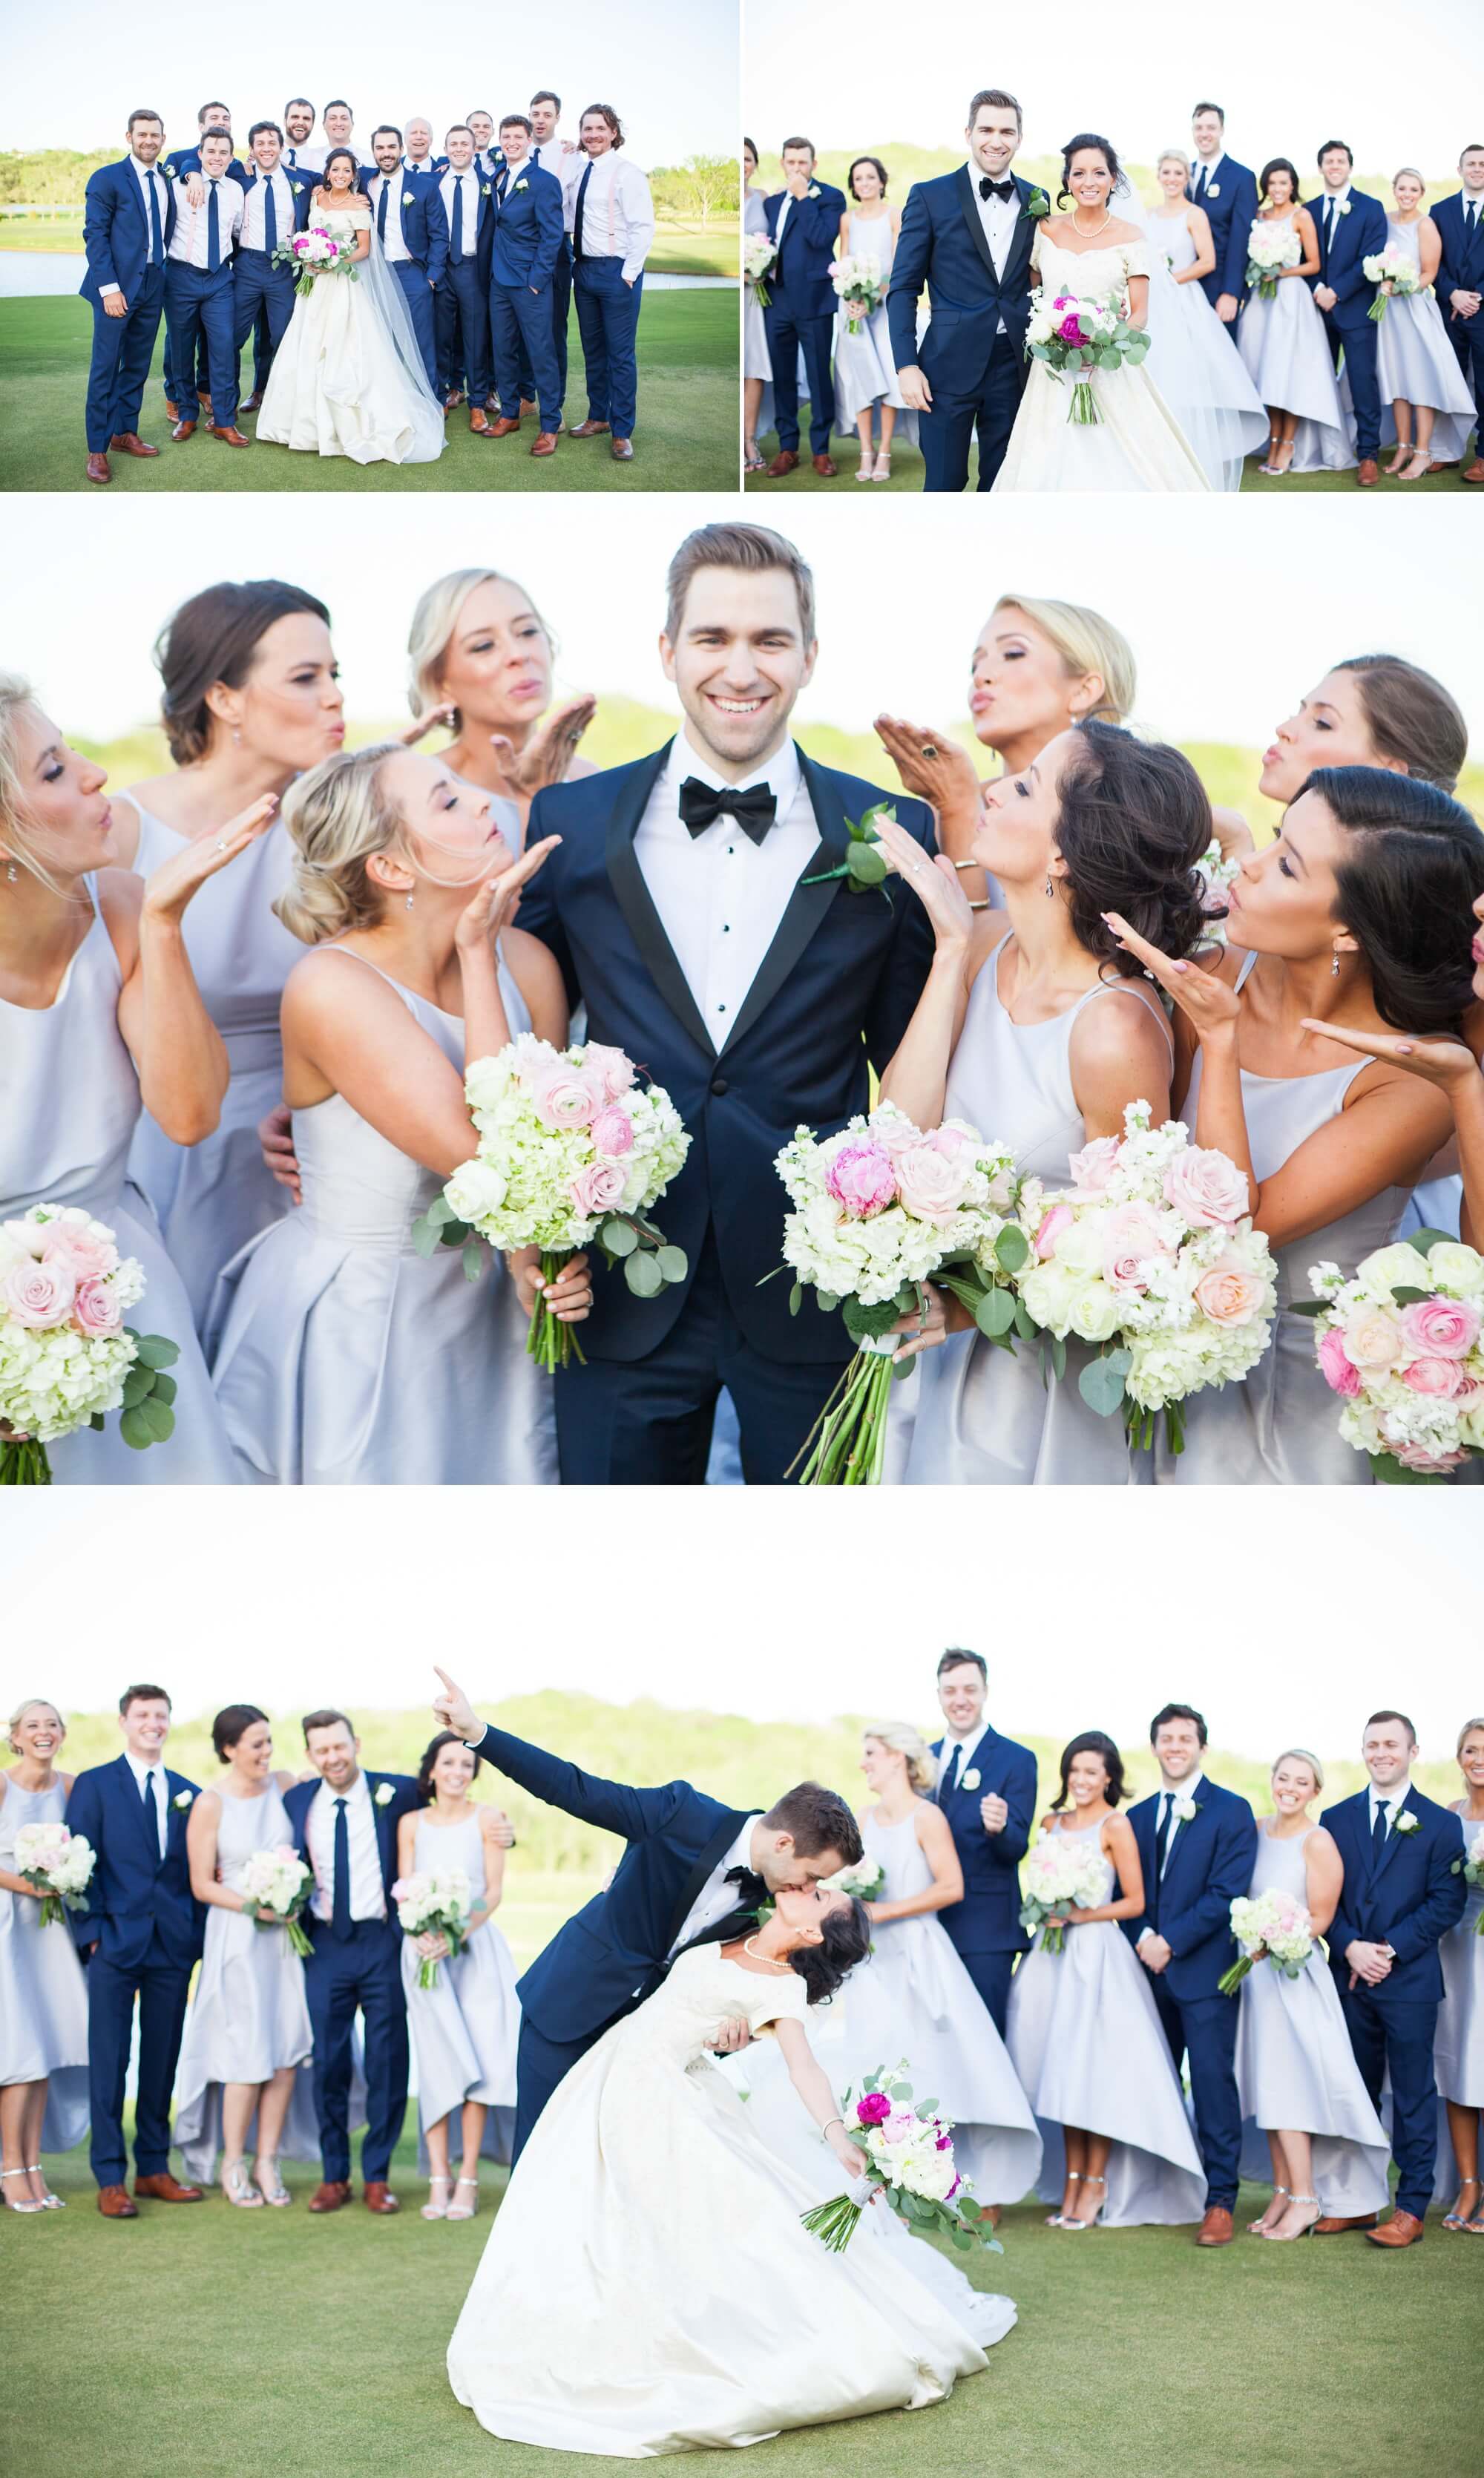 Bridal party photos after ceremony at The Grove golf course in College Grove, TN. Photos by Krista Lee Photography. 